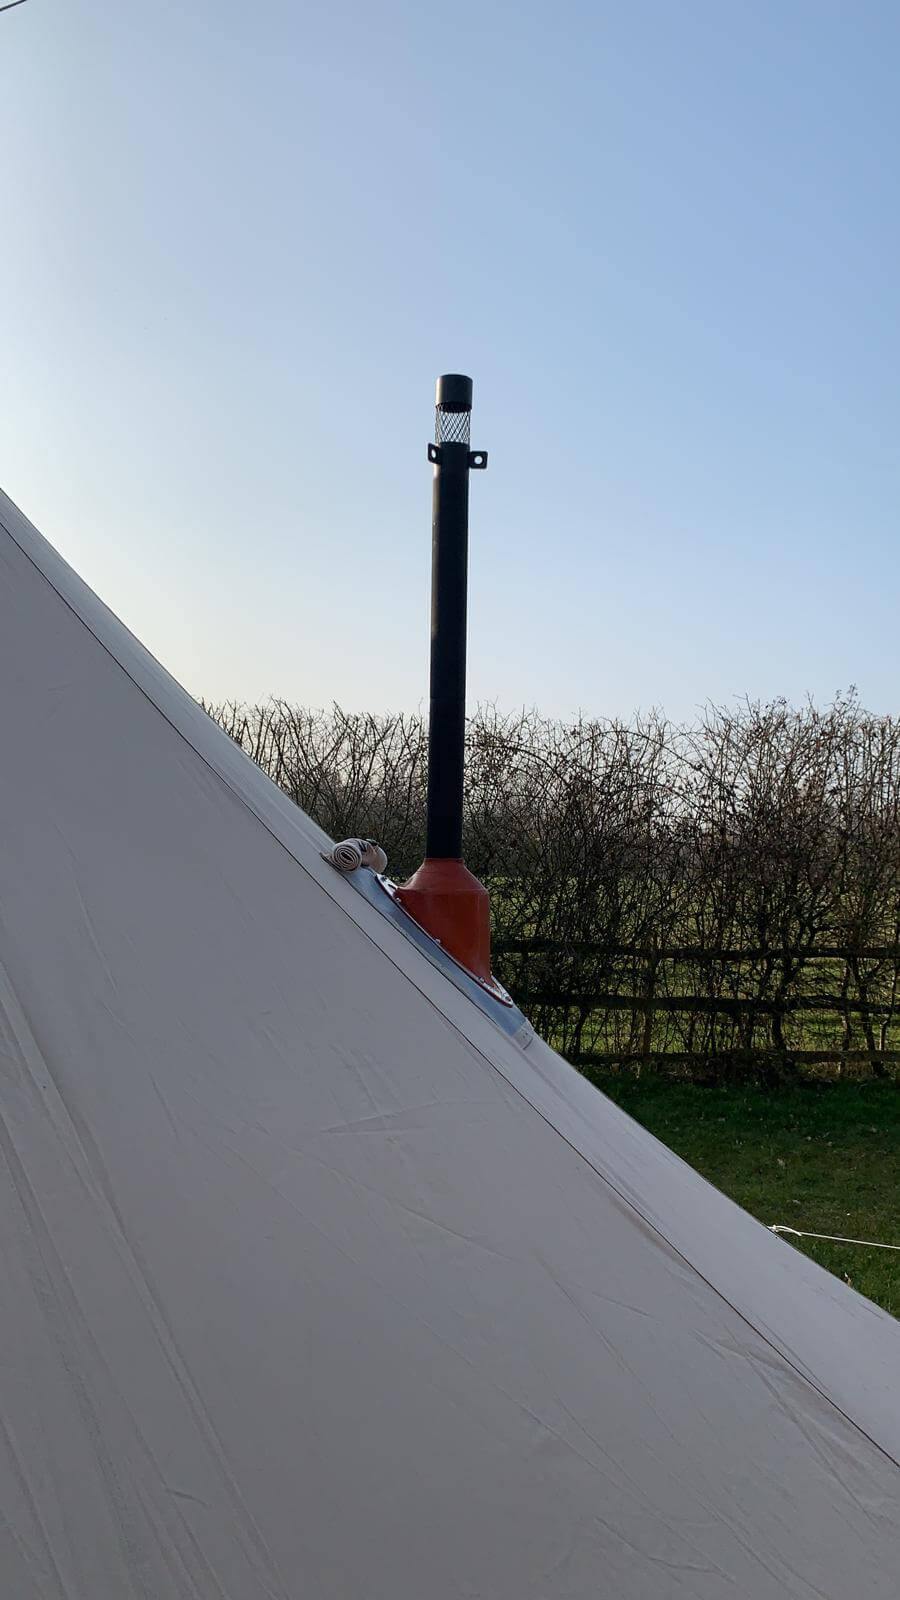 Stove angled flashing kit for bell tent - Bell Tent Sussex